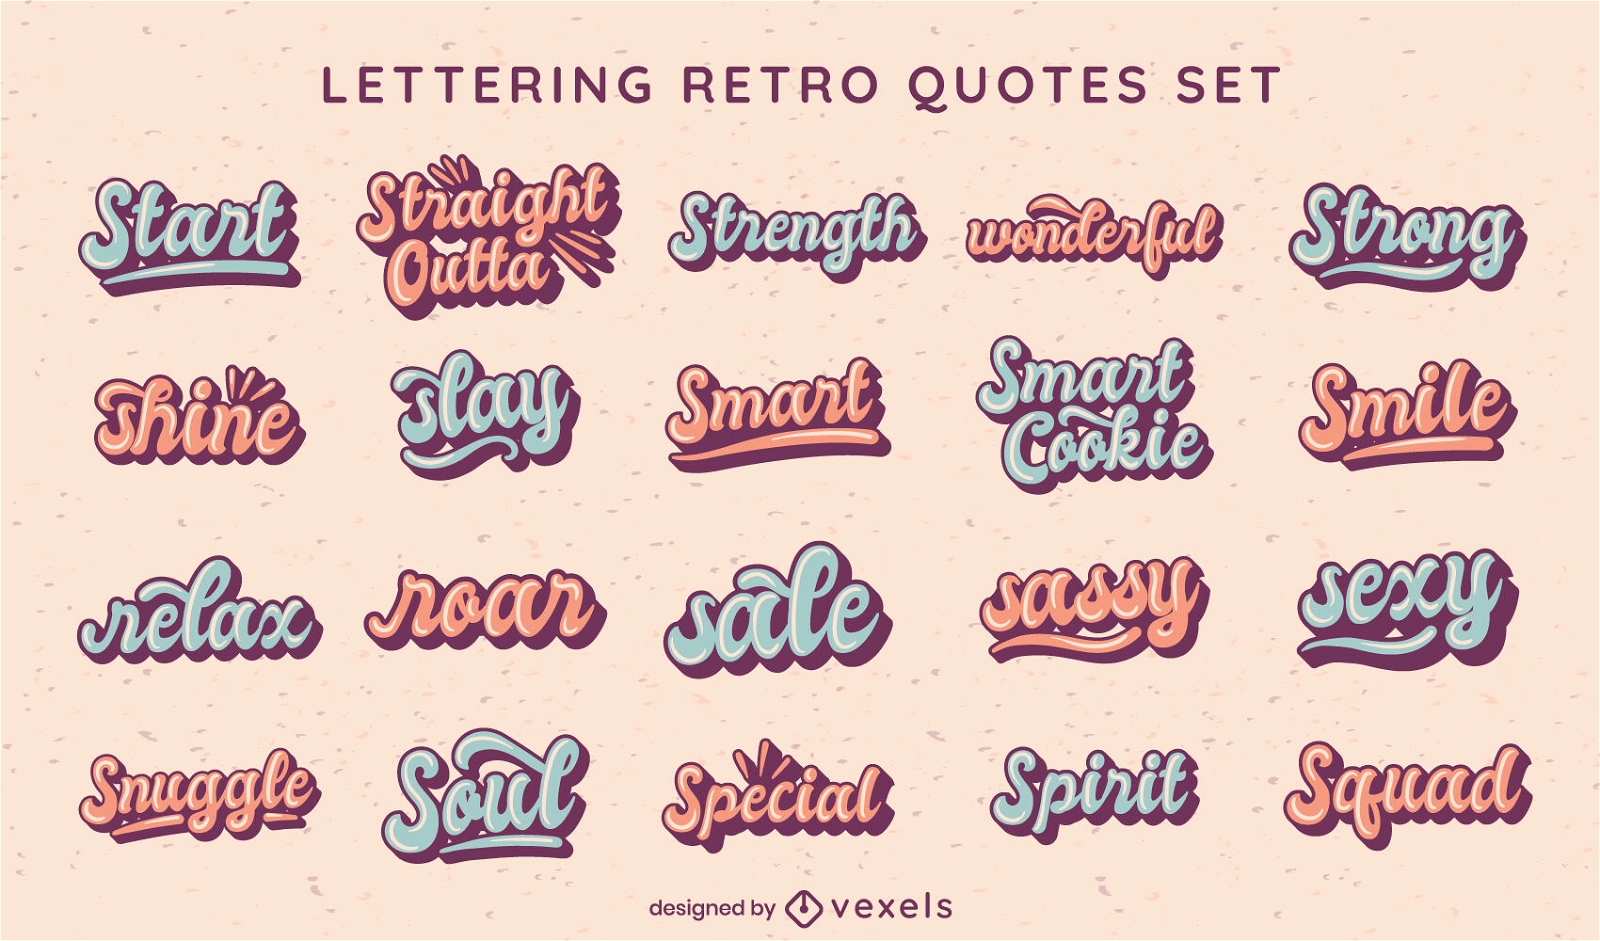 Awesome lettering quotes set